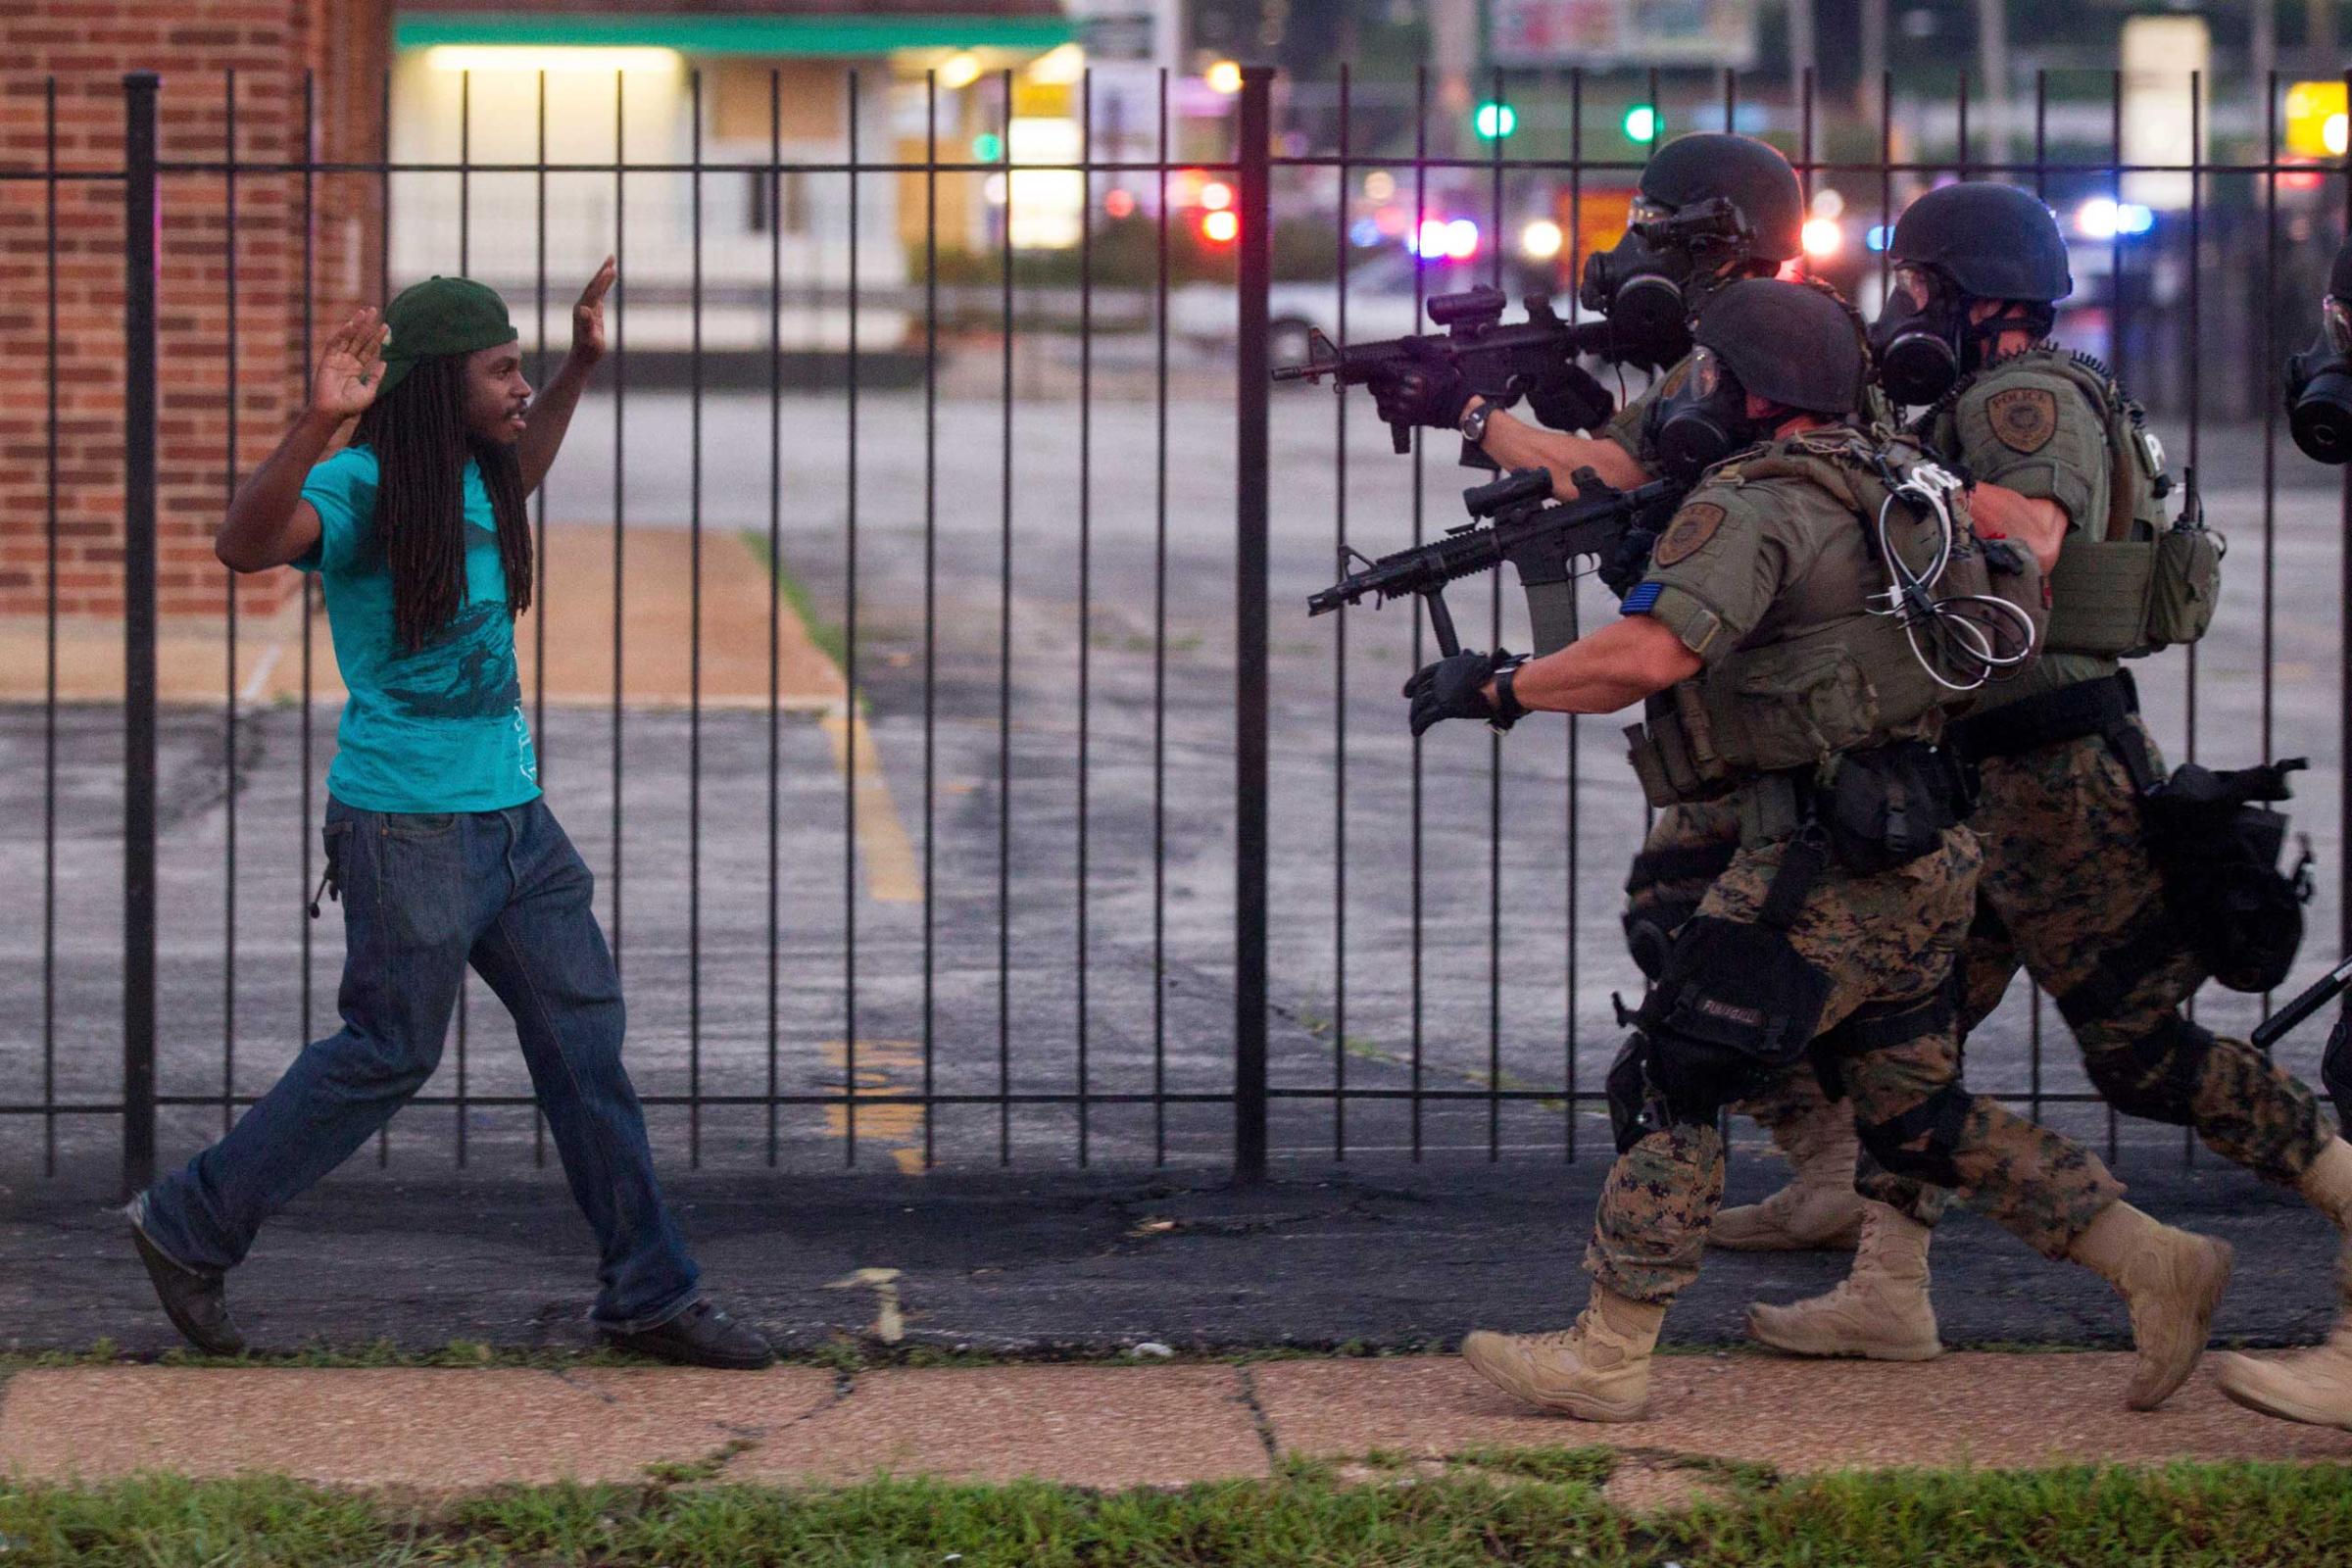 Police move in to detain a protester in Ferguson, Mo.